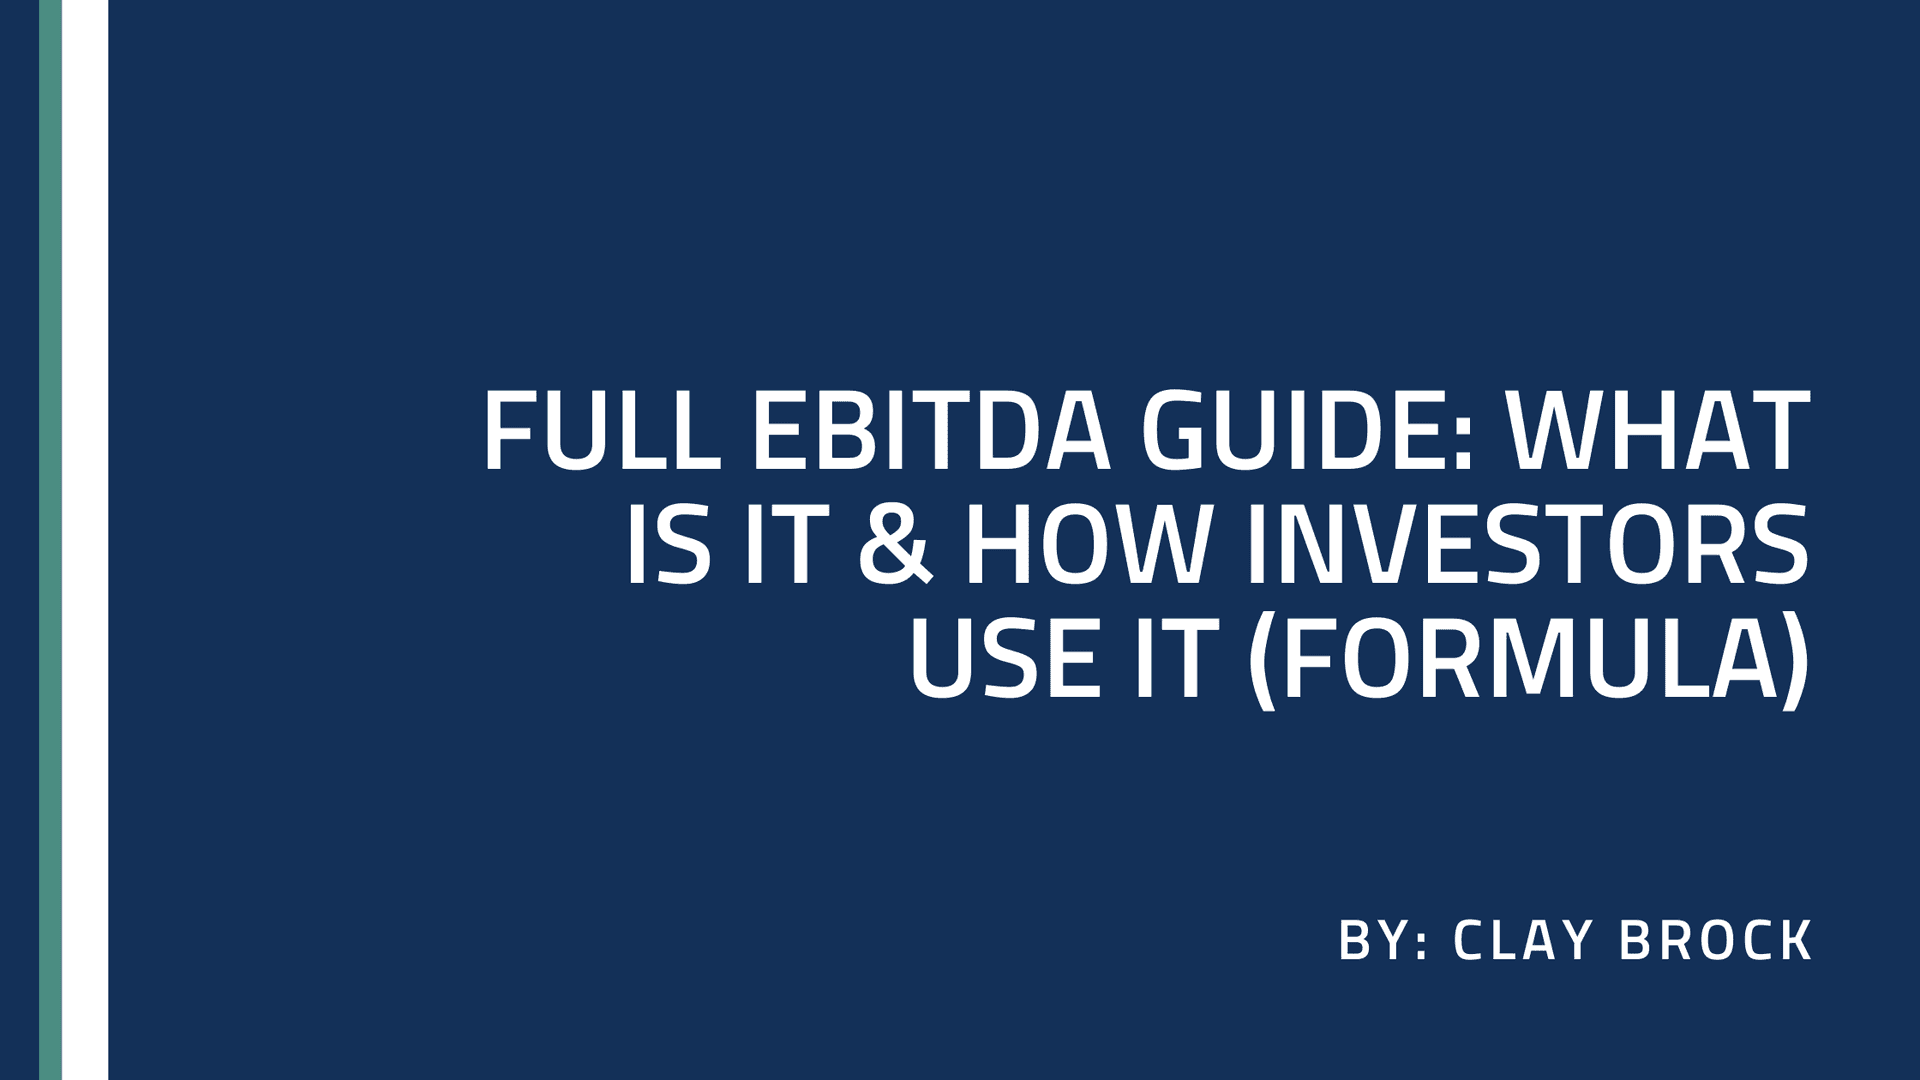 Full EBITDA Guide: What is It & How Investors Use It (Formula)